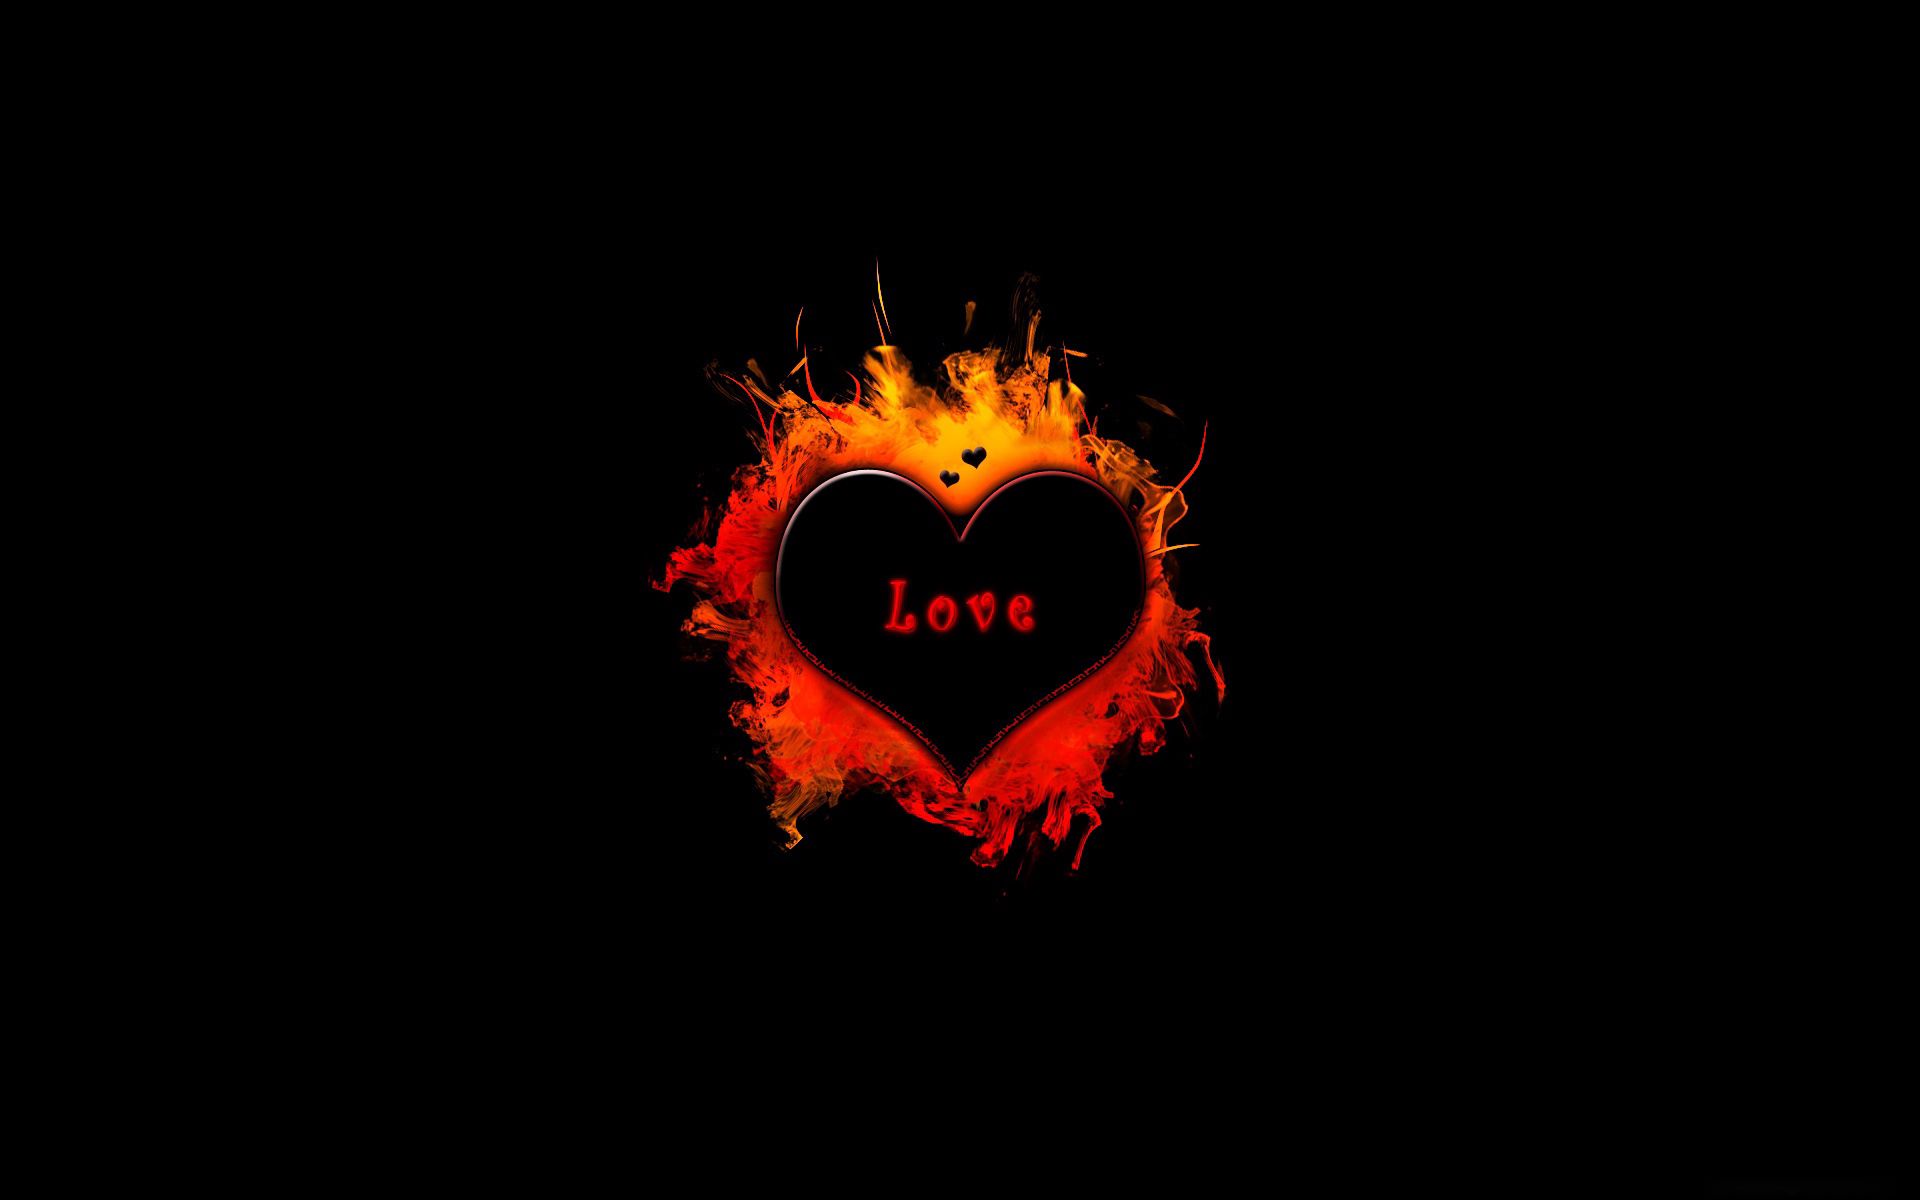 love, shadow, heart, flame, fire wallpaper for mobile